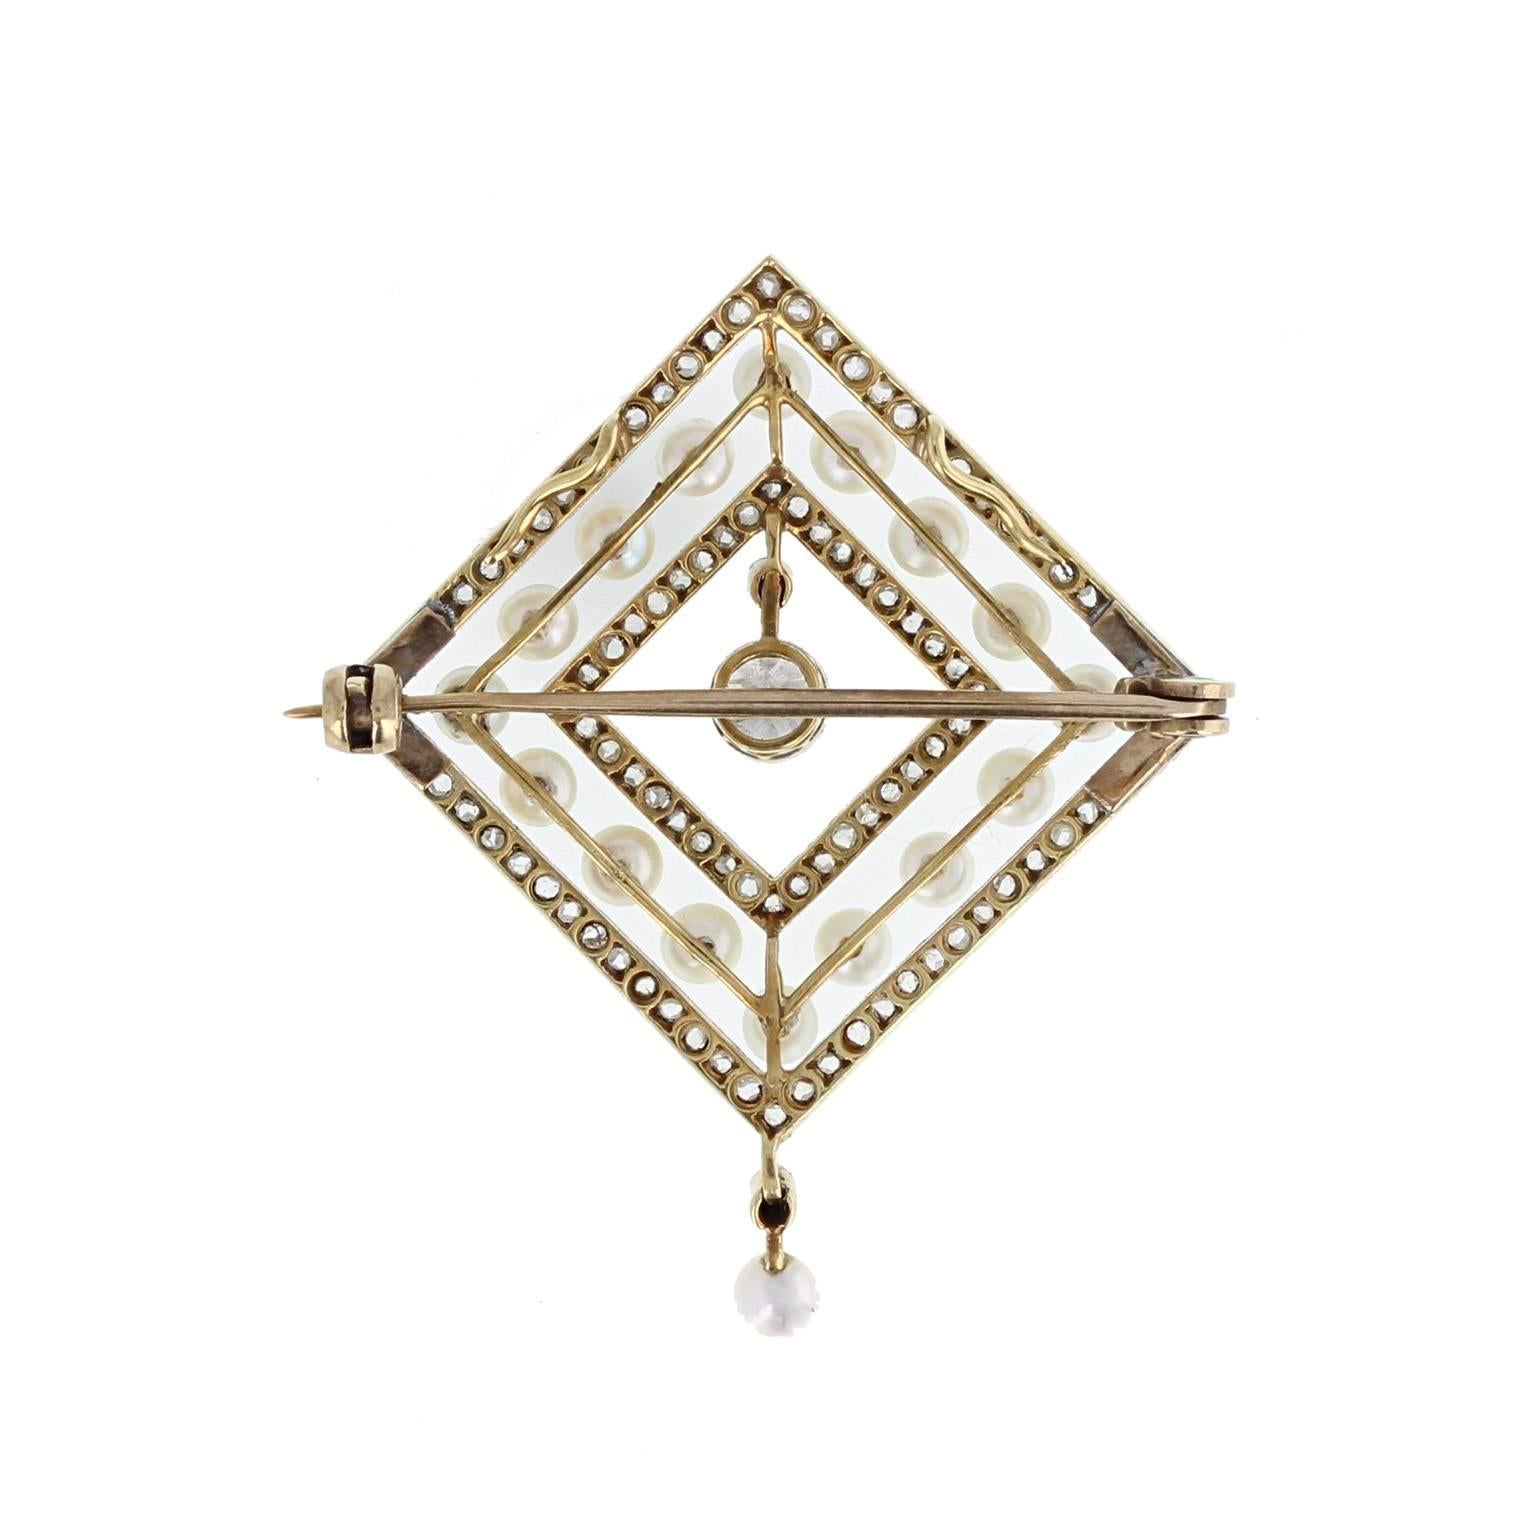 A wonderful brooch circa late 1912. A single transition-cut diamond of approximately 0.30 of a carat at the centre, in a mille-grain edged setting. Surrounded by three alternating squares of rose-cut diamonds and pearls. A single pearl and diamond